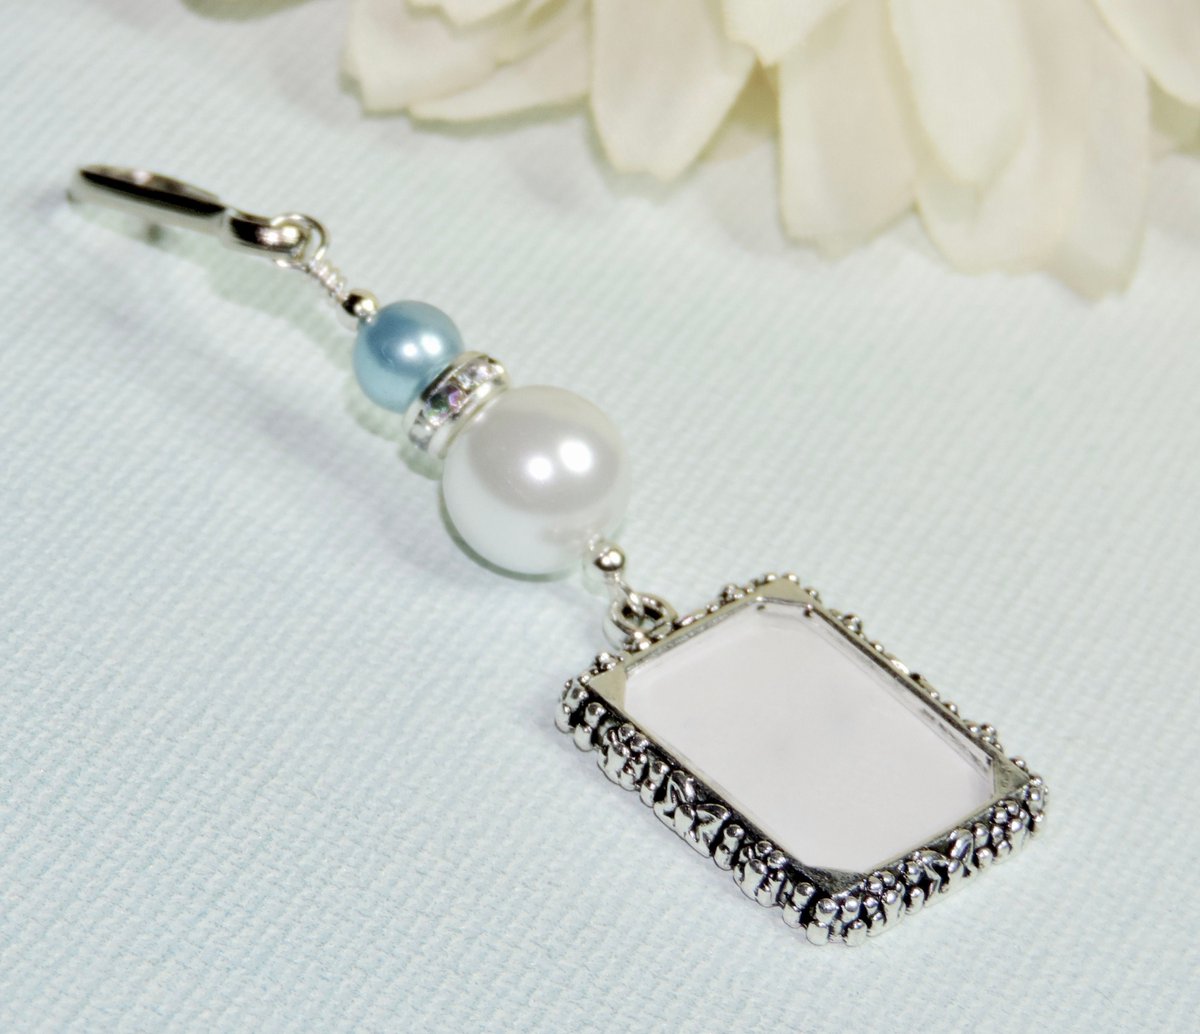 Remember someone you love with this elegant memorial photo charm! Perfect for a bride's bouquet, but not limited to that :) etsy.me/3qZfUx1 @Etsy #etsy #etsymntt #epiconetsy #etsychaching #etsyclub #womaninbiz #bizitalk #etsyfinds #weddings #memorials #giftidea